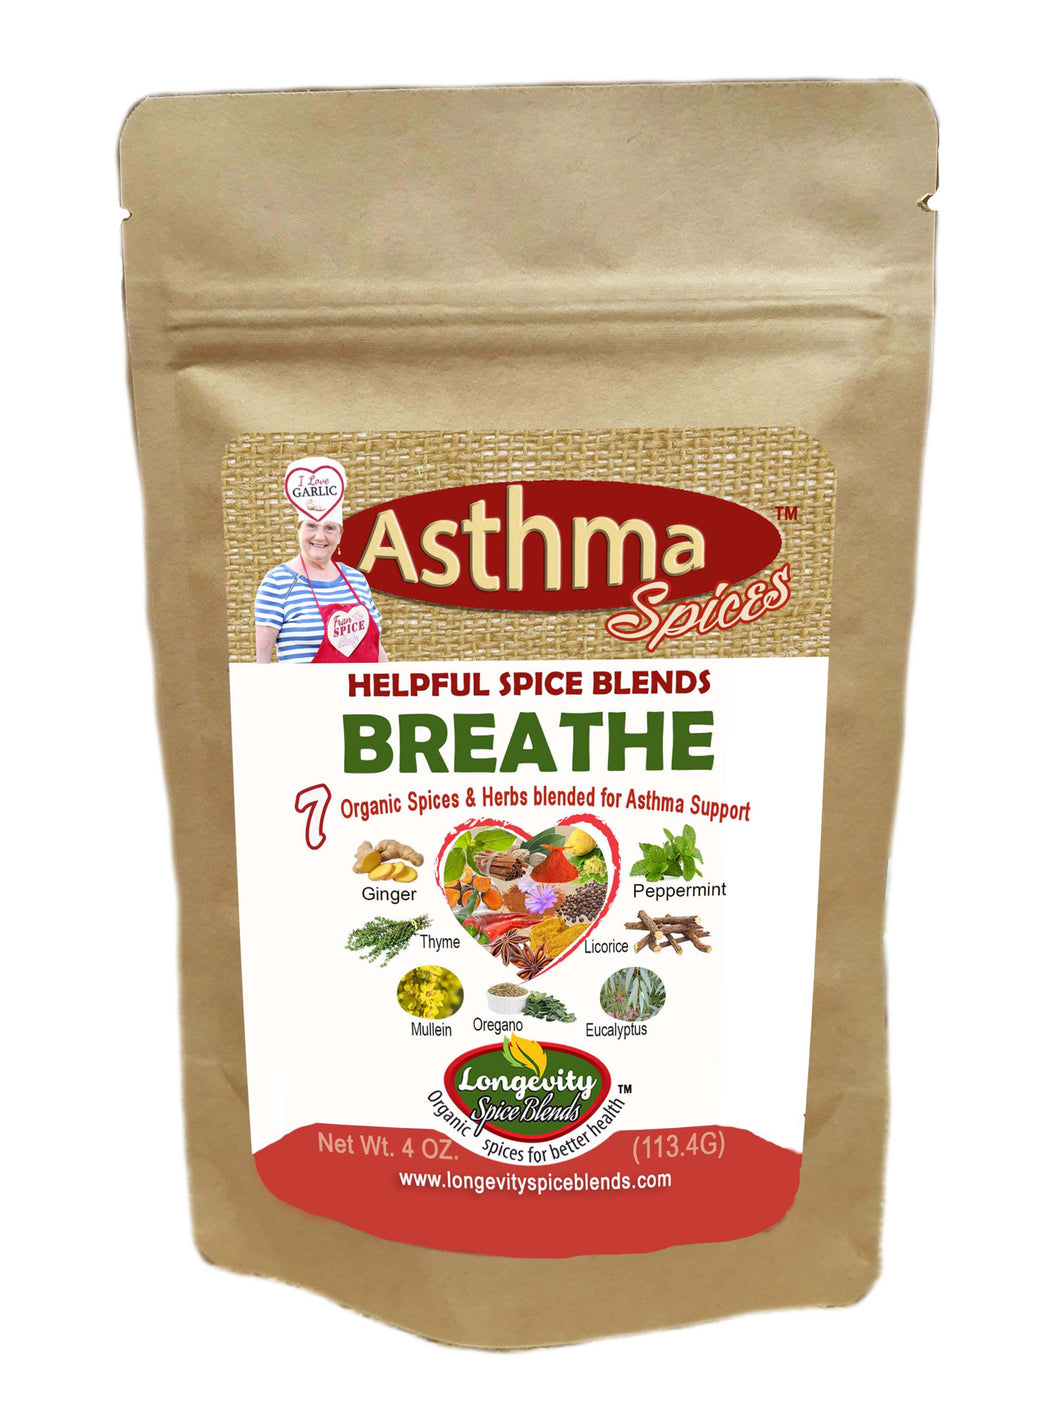 Asthma Spice & Herb Blend: Enhance Respiratory Health with our Selection of Asthma-Friendly Ingredients